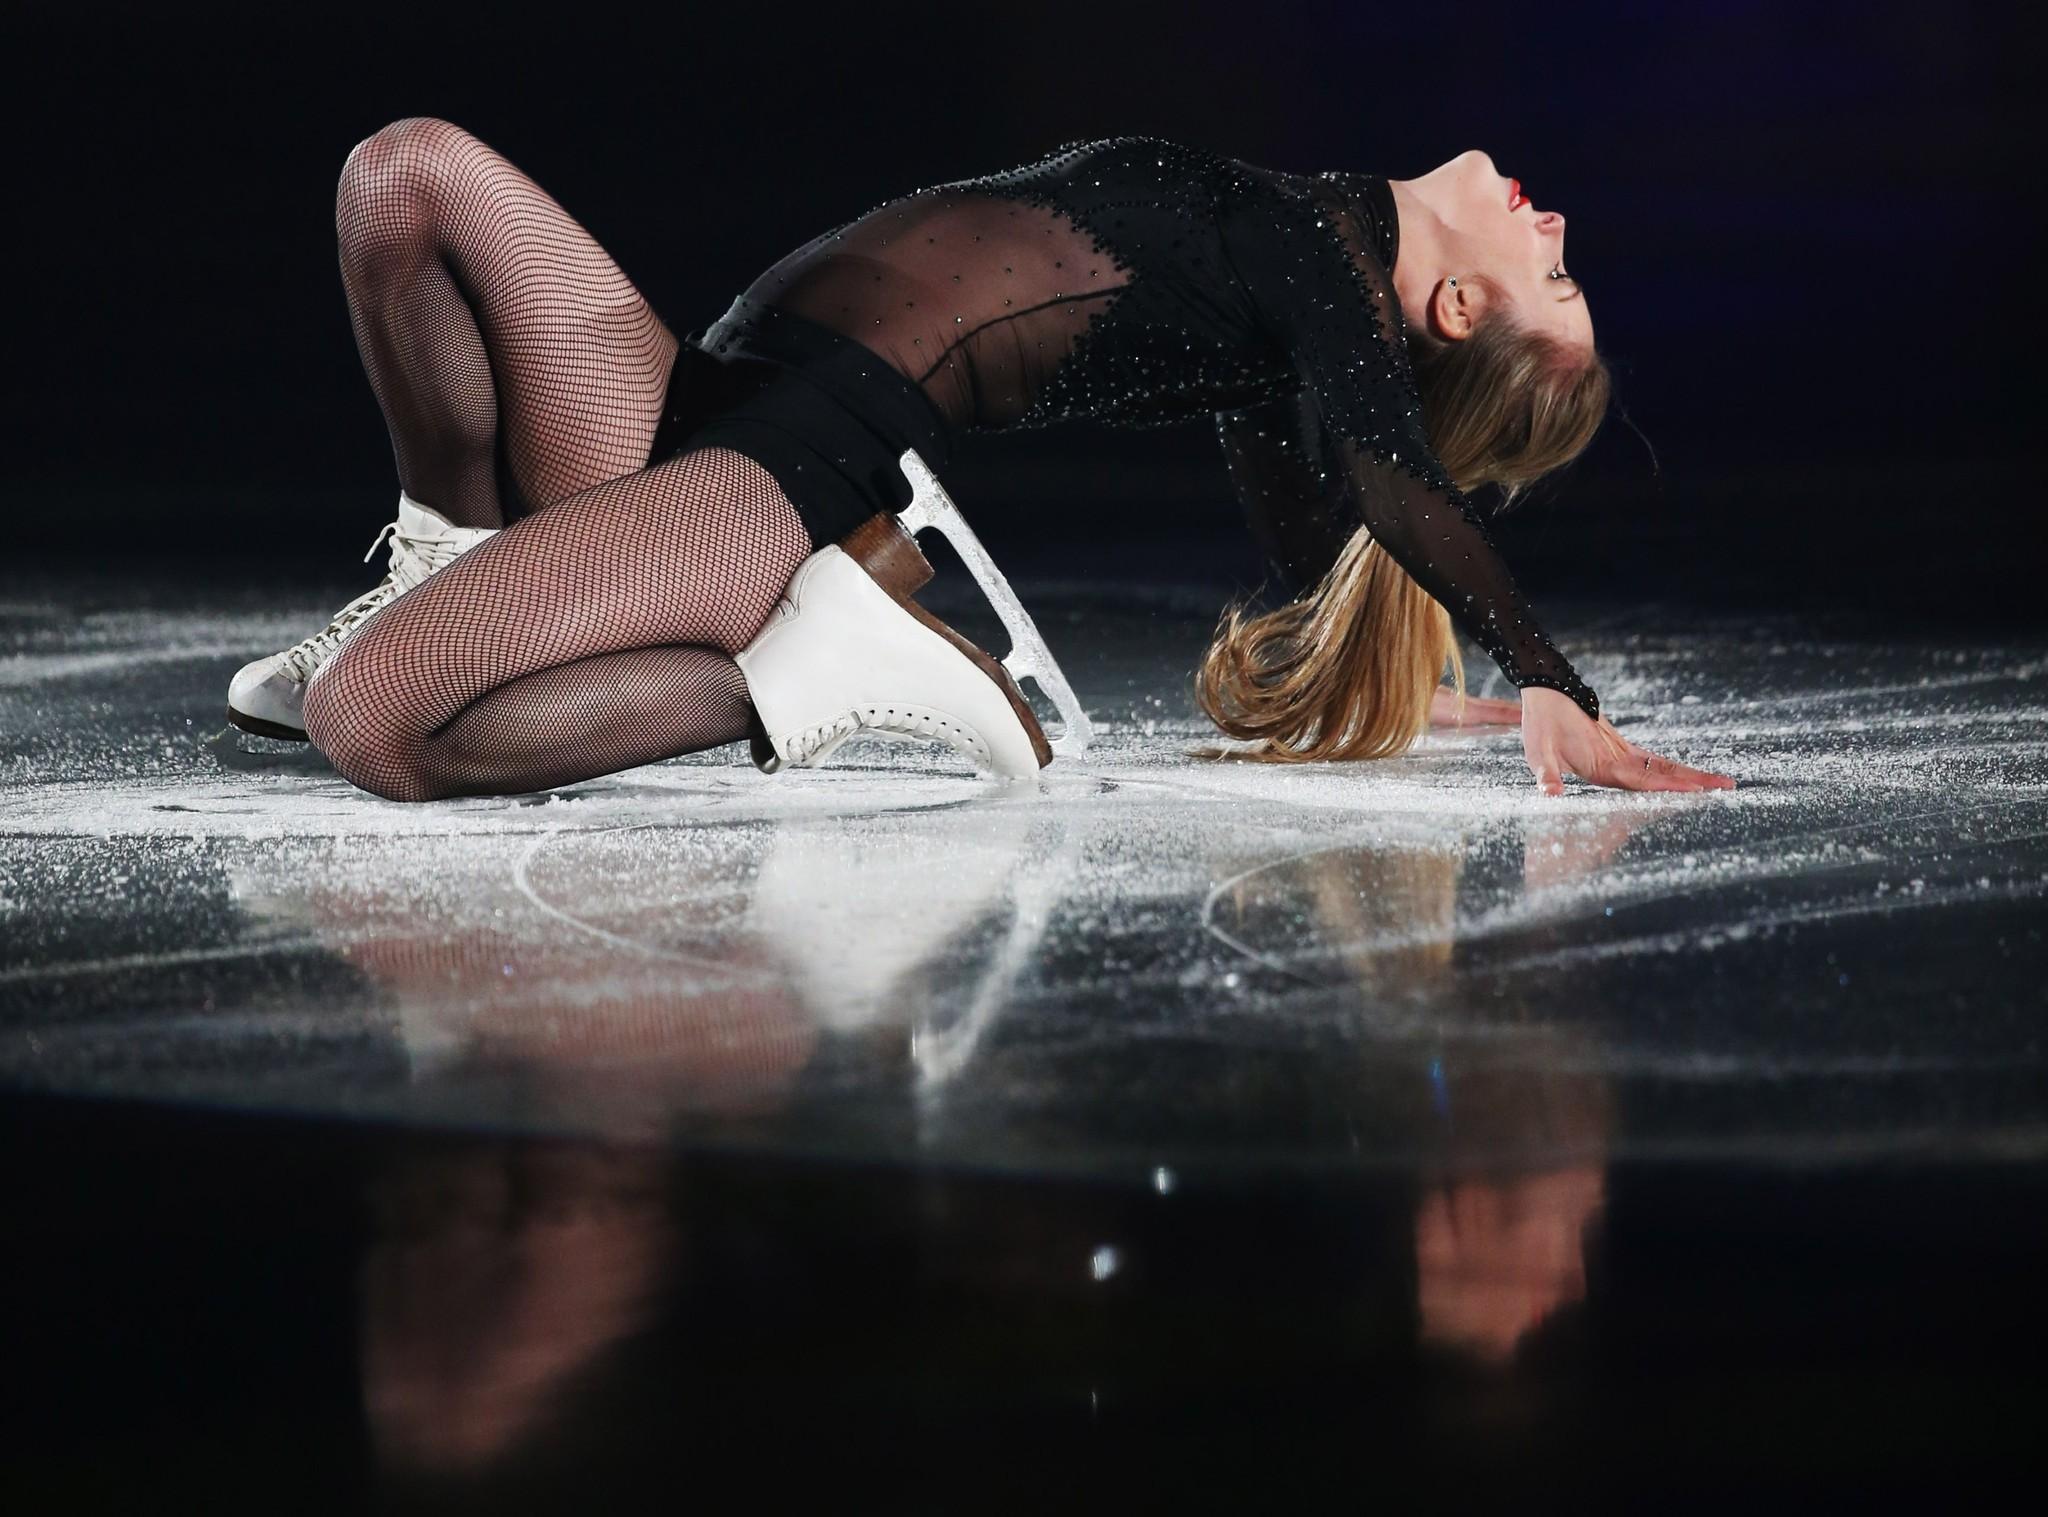 Ashley Wagner. Ice, Nice and Ice skaters